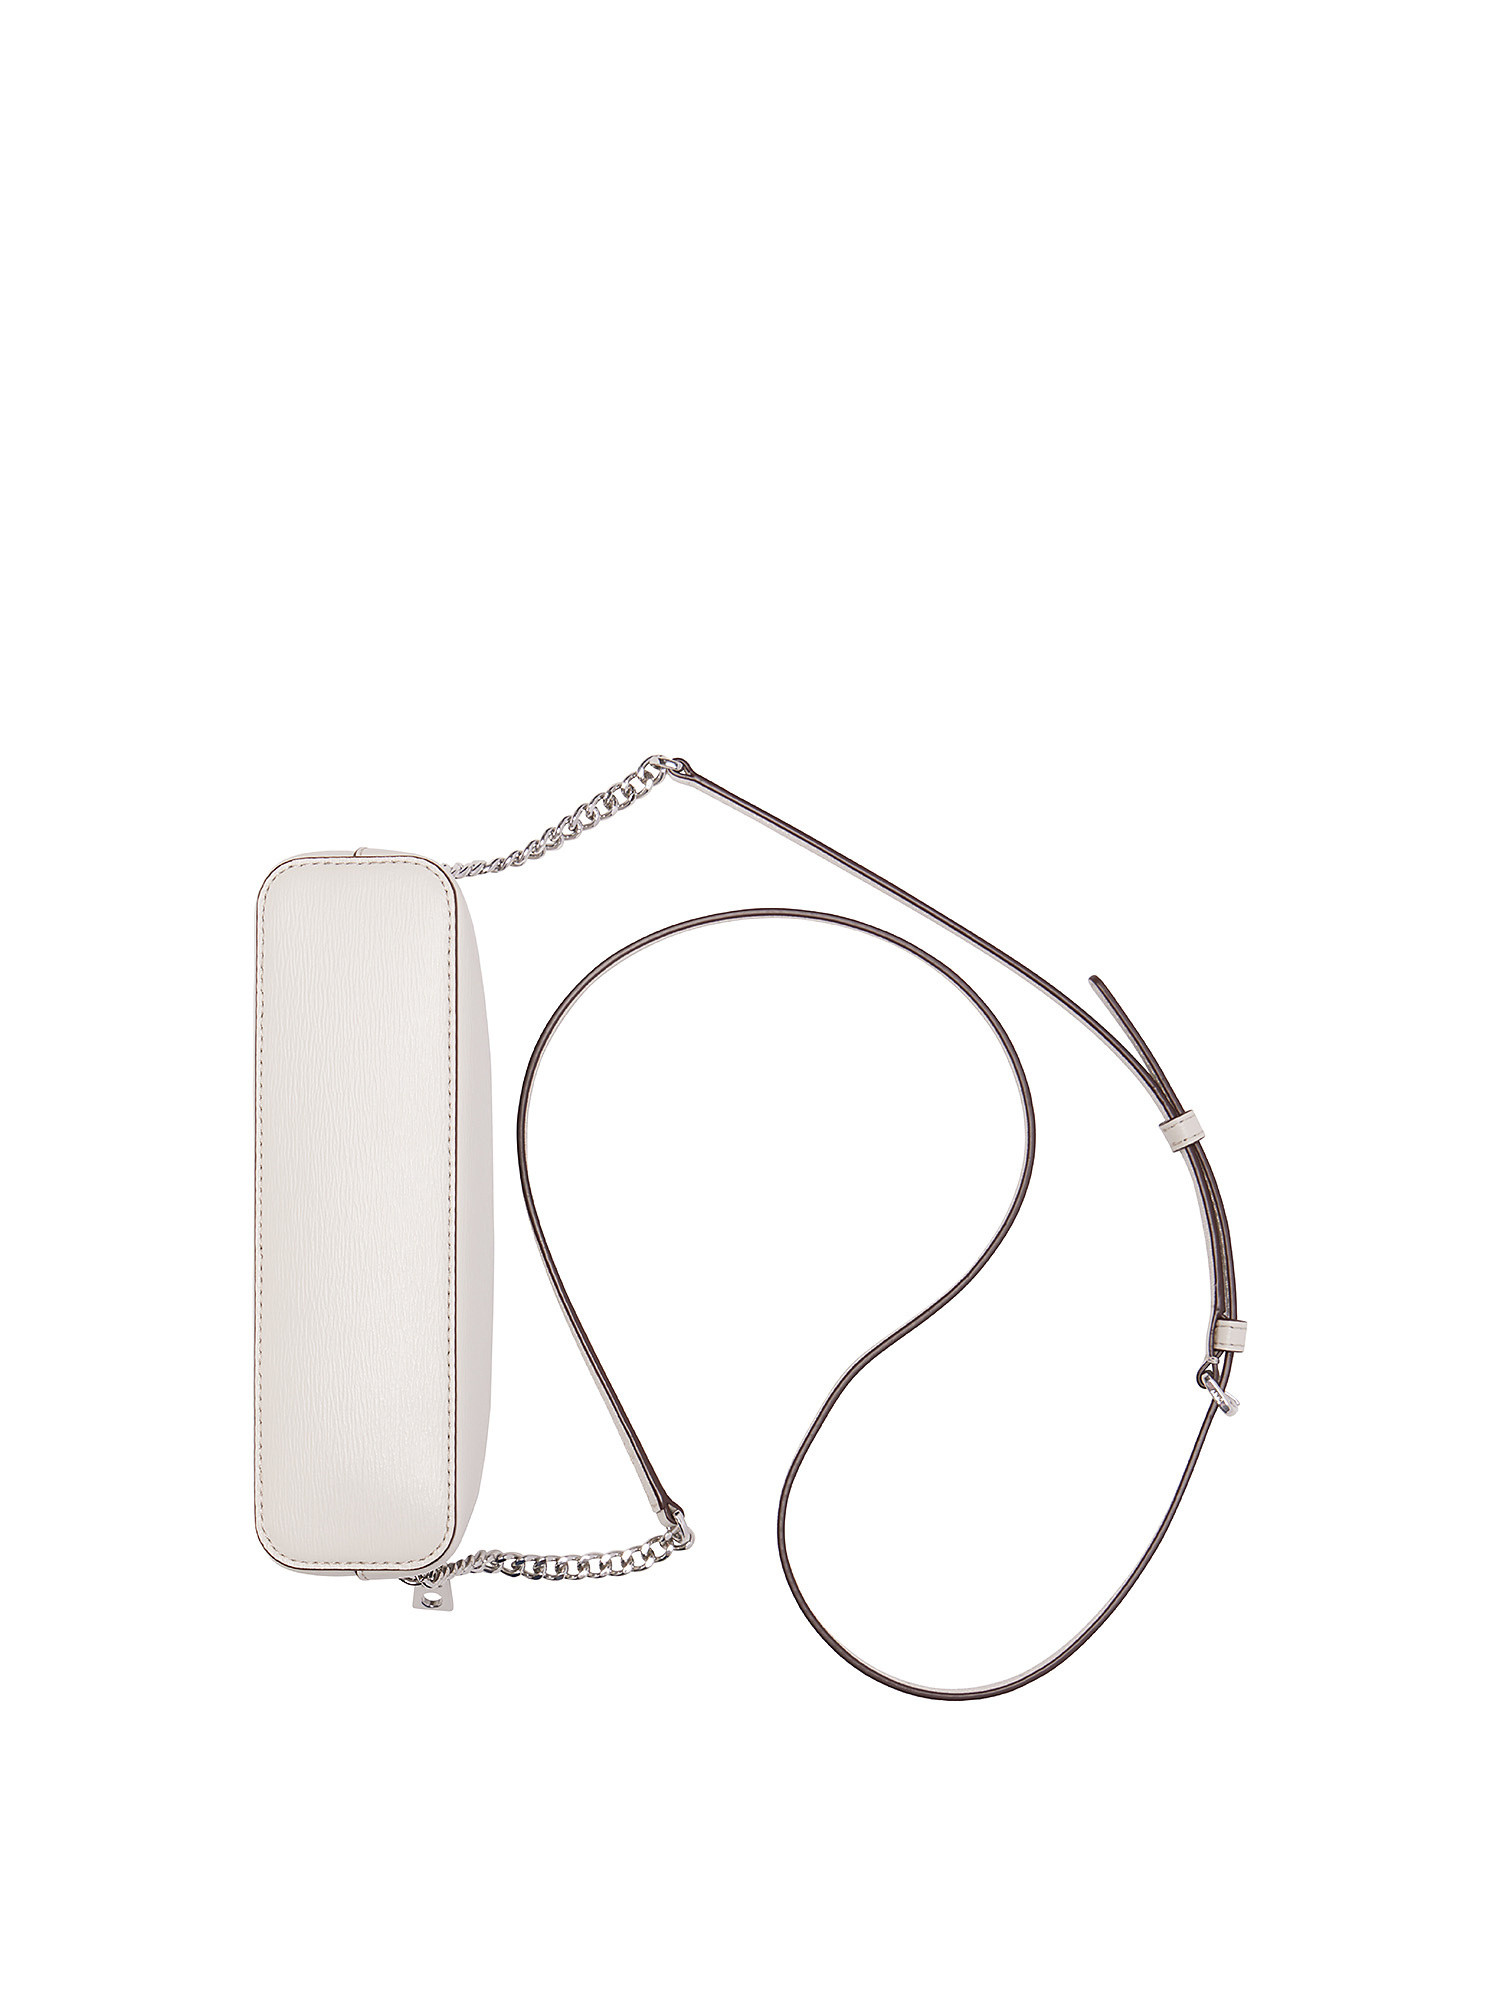 Dkny - Shoulder bag with chain and silver logo, White, large image number 4